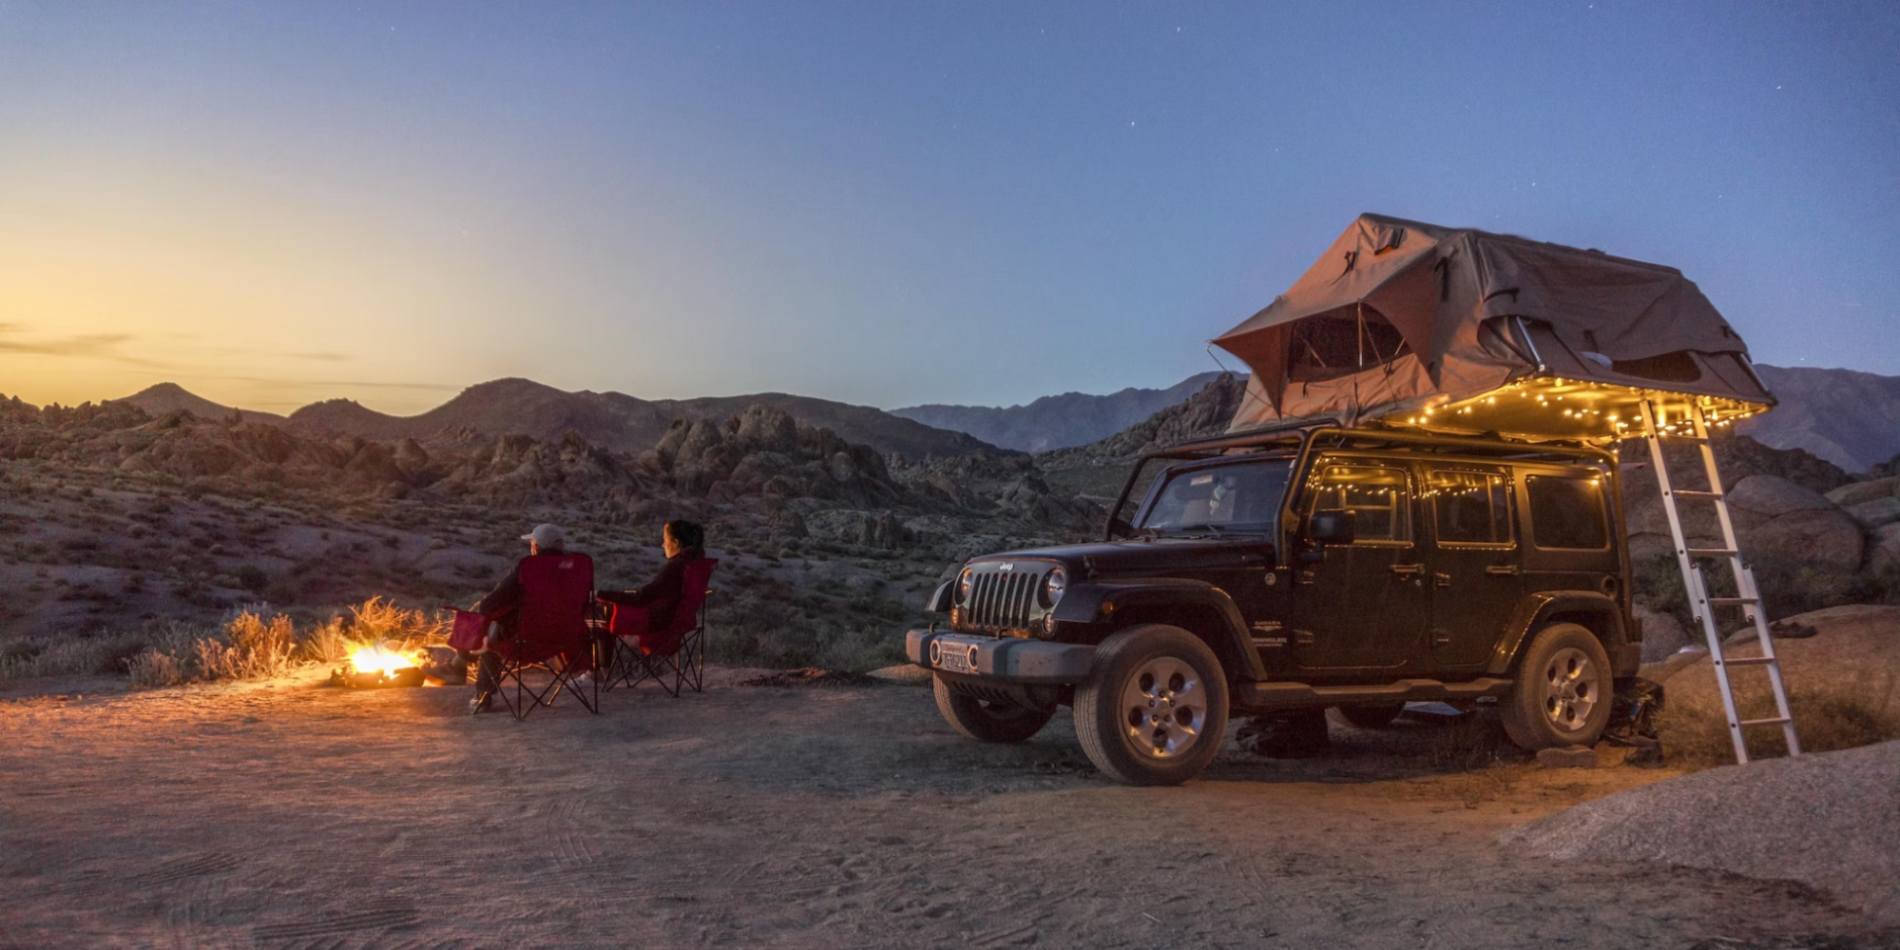 Overlanding and 2 men sitting near a campfire and an SUV with a tent atop parking behind the two men